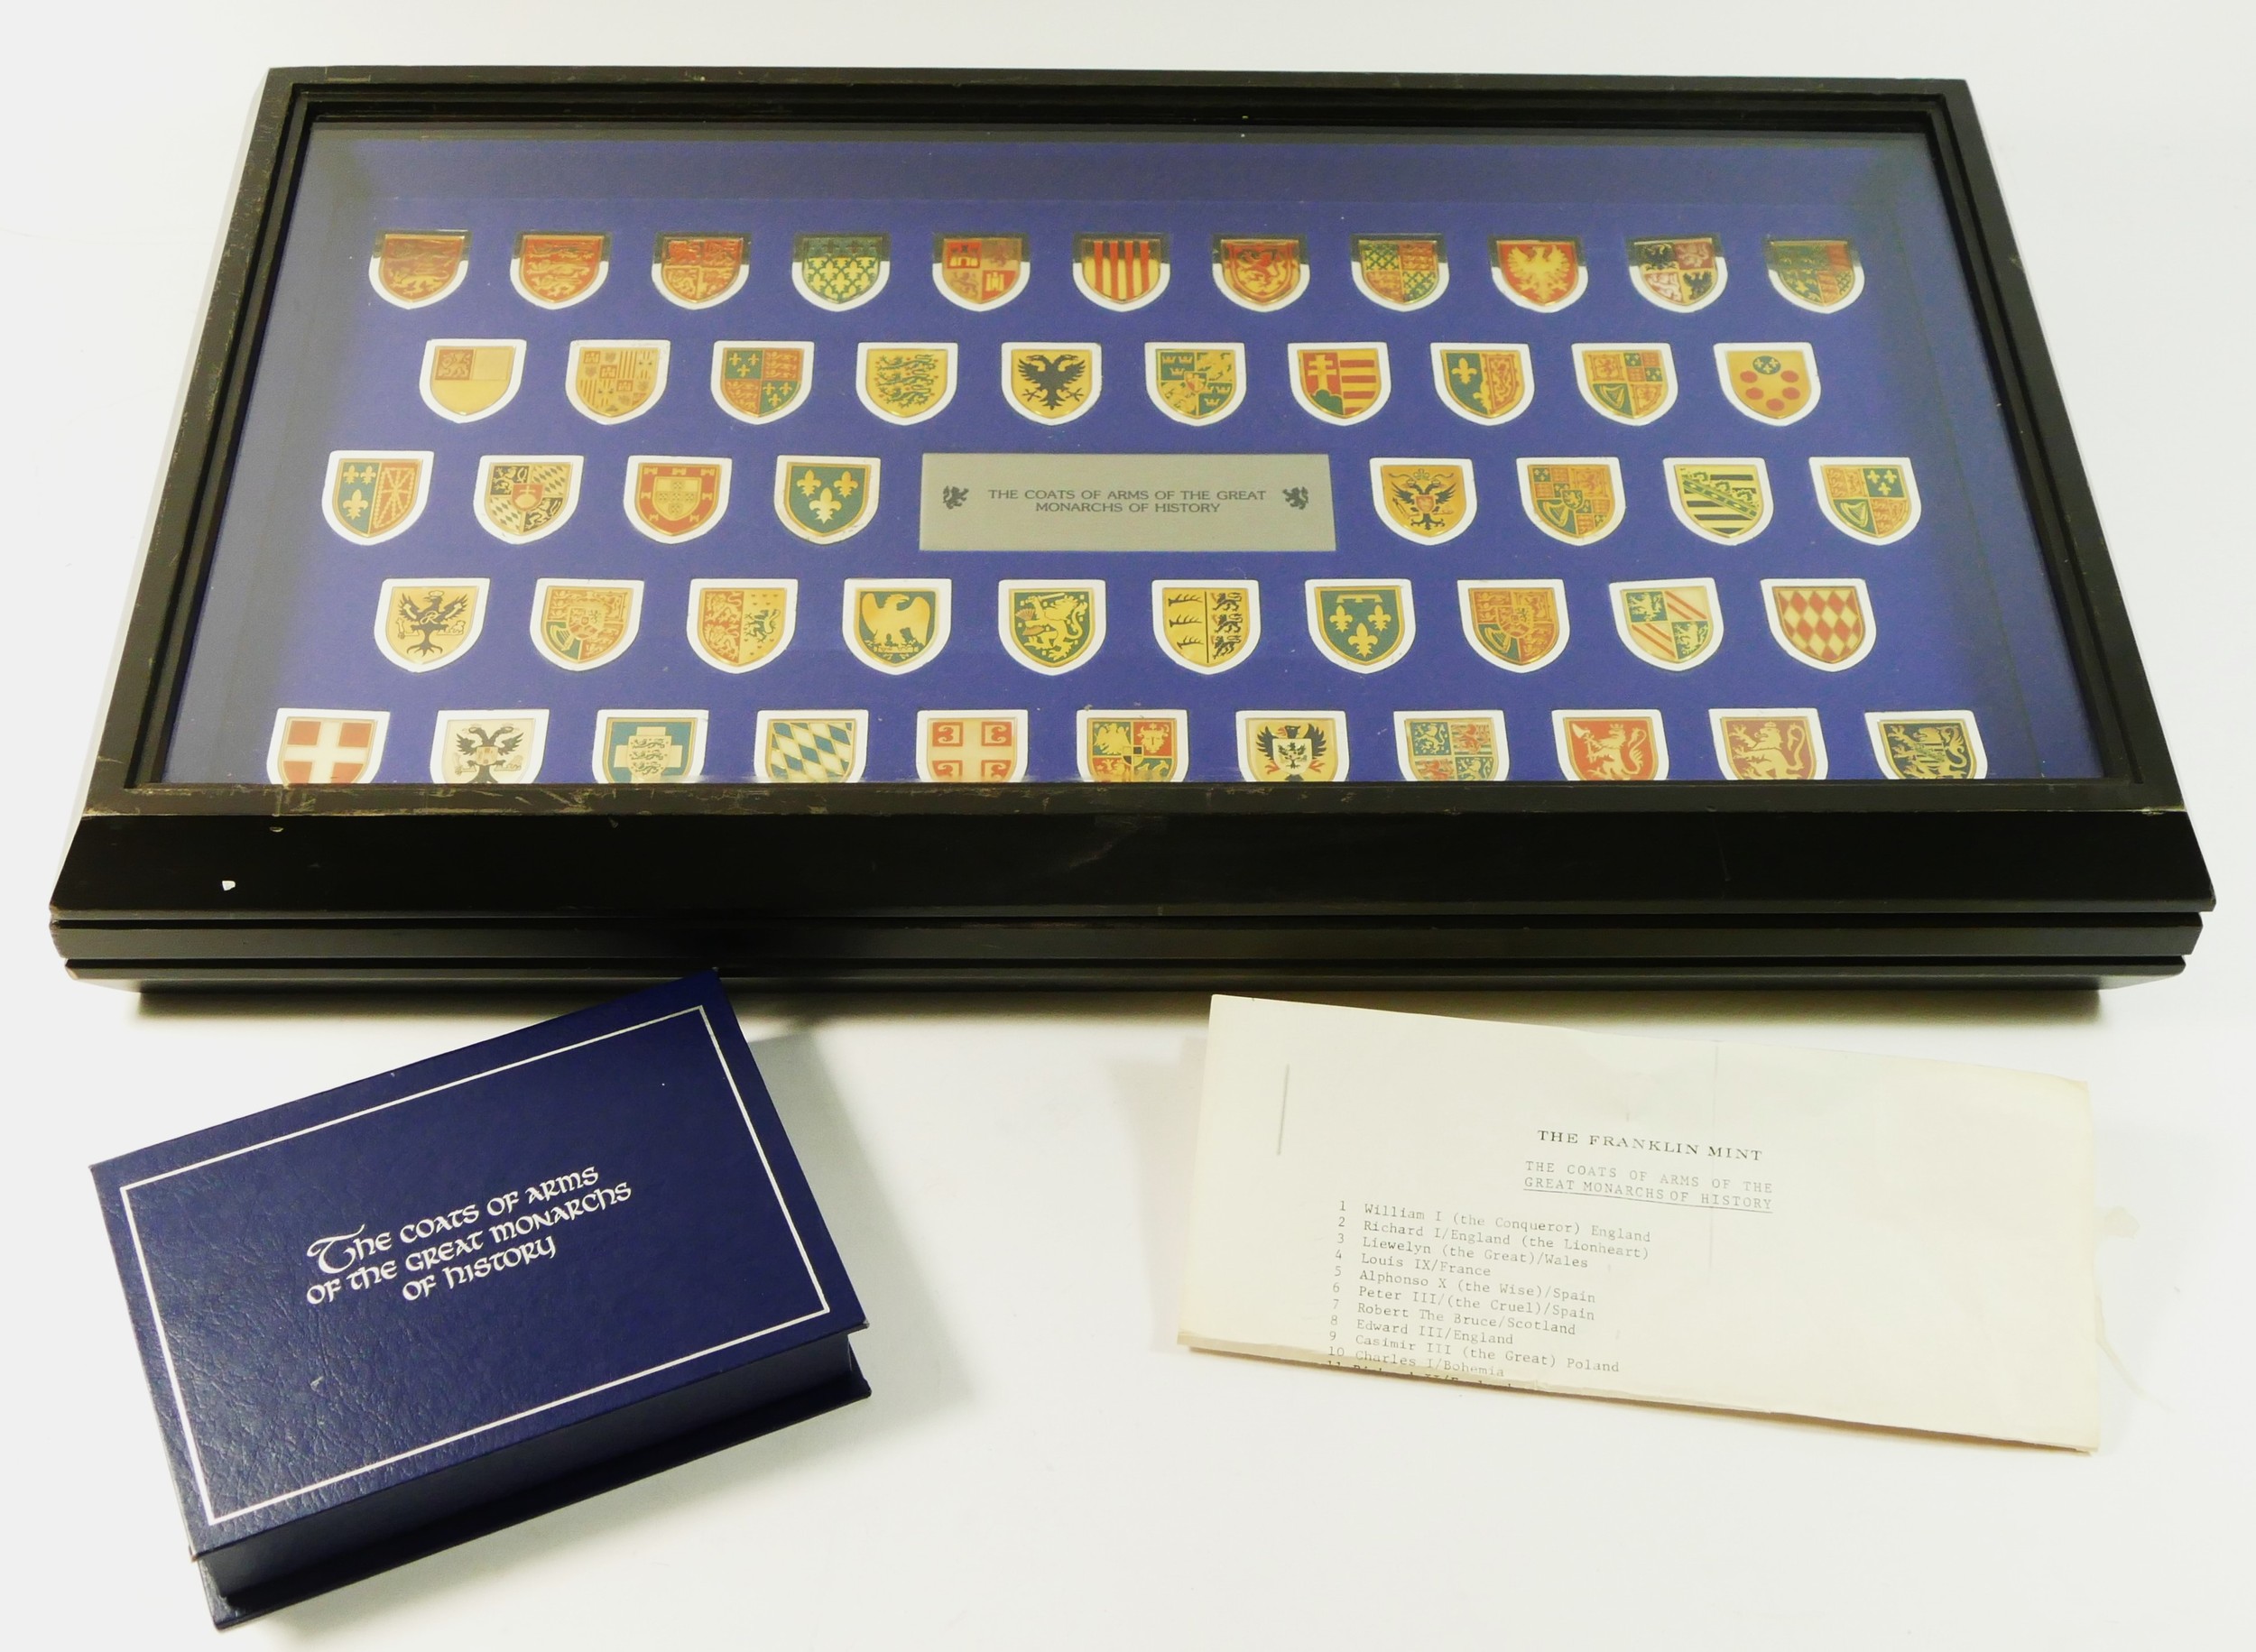 Franklin Mint, a display box containing 50 coats of arms in silver plate, gold plate and enamel of - Image 3 of 3